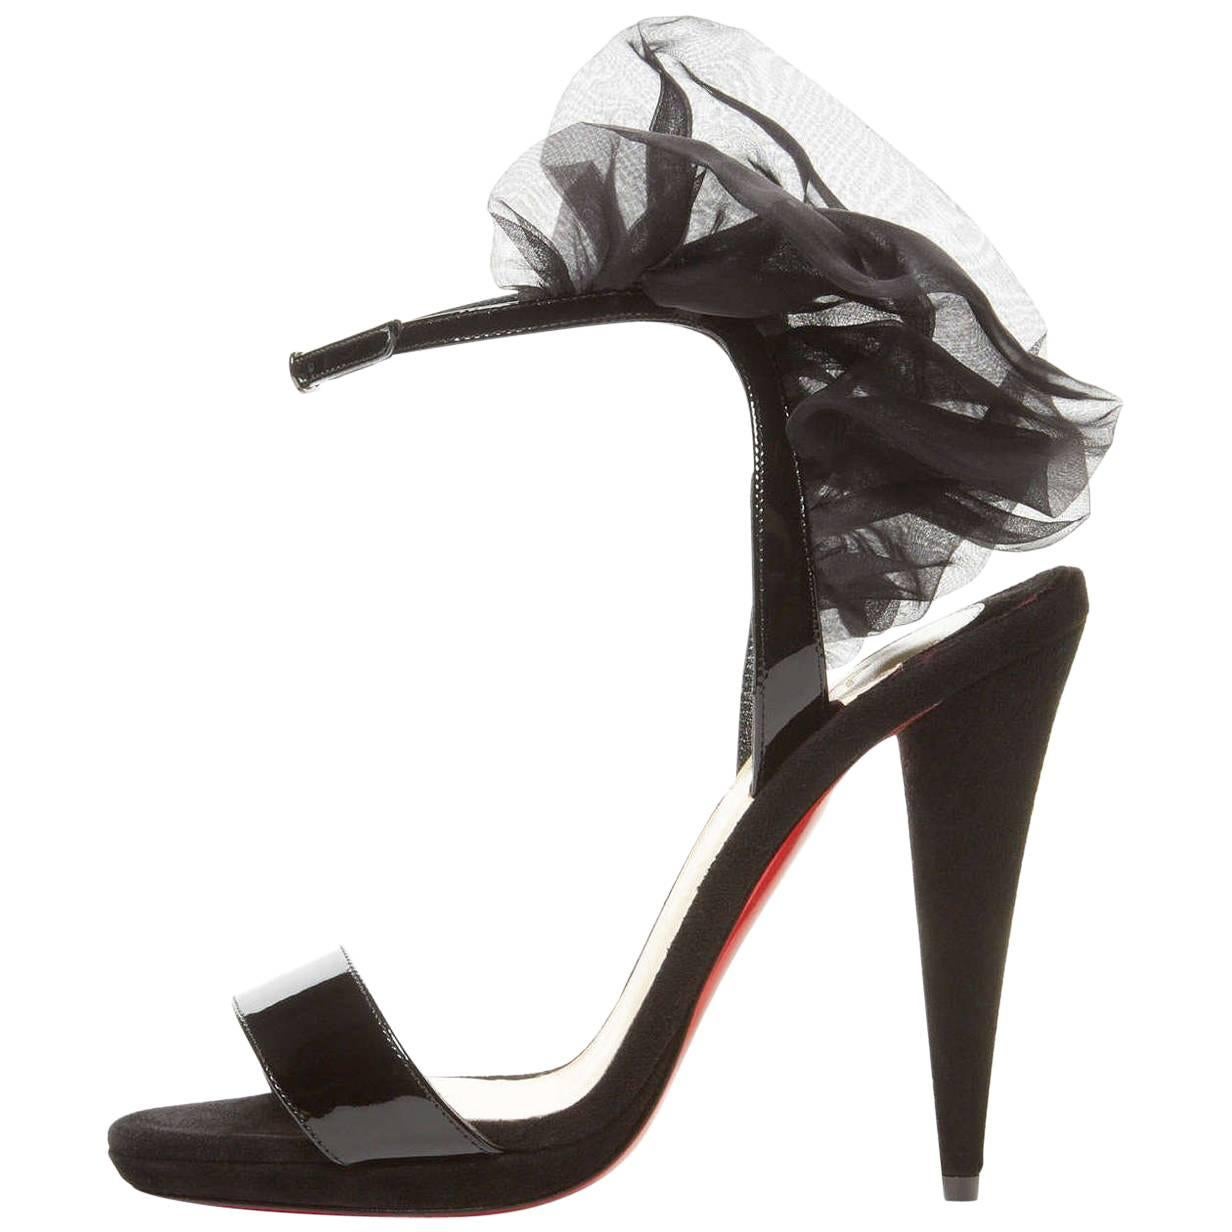 Christian Louboutin New Sold Out Black Patent Evening Sandals Heels in Box